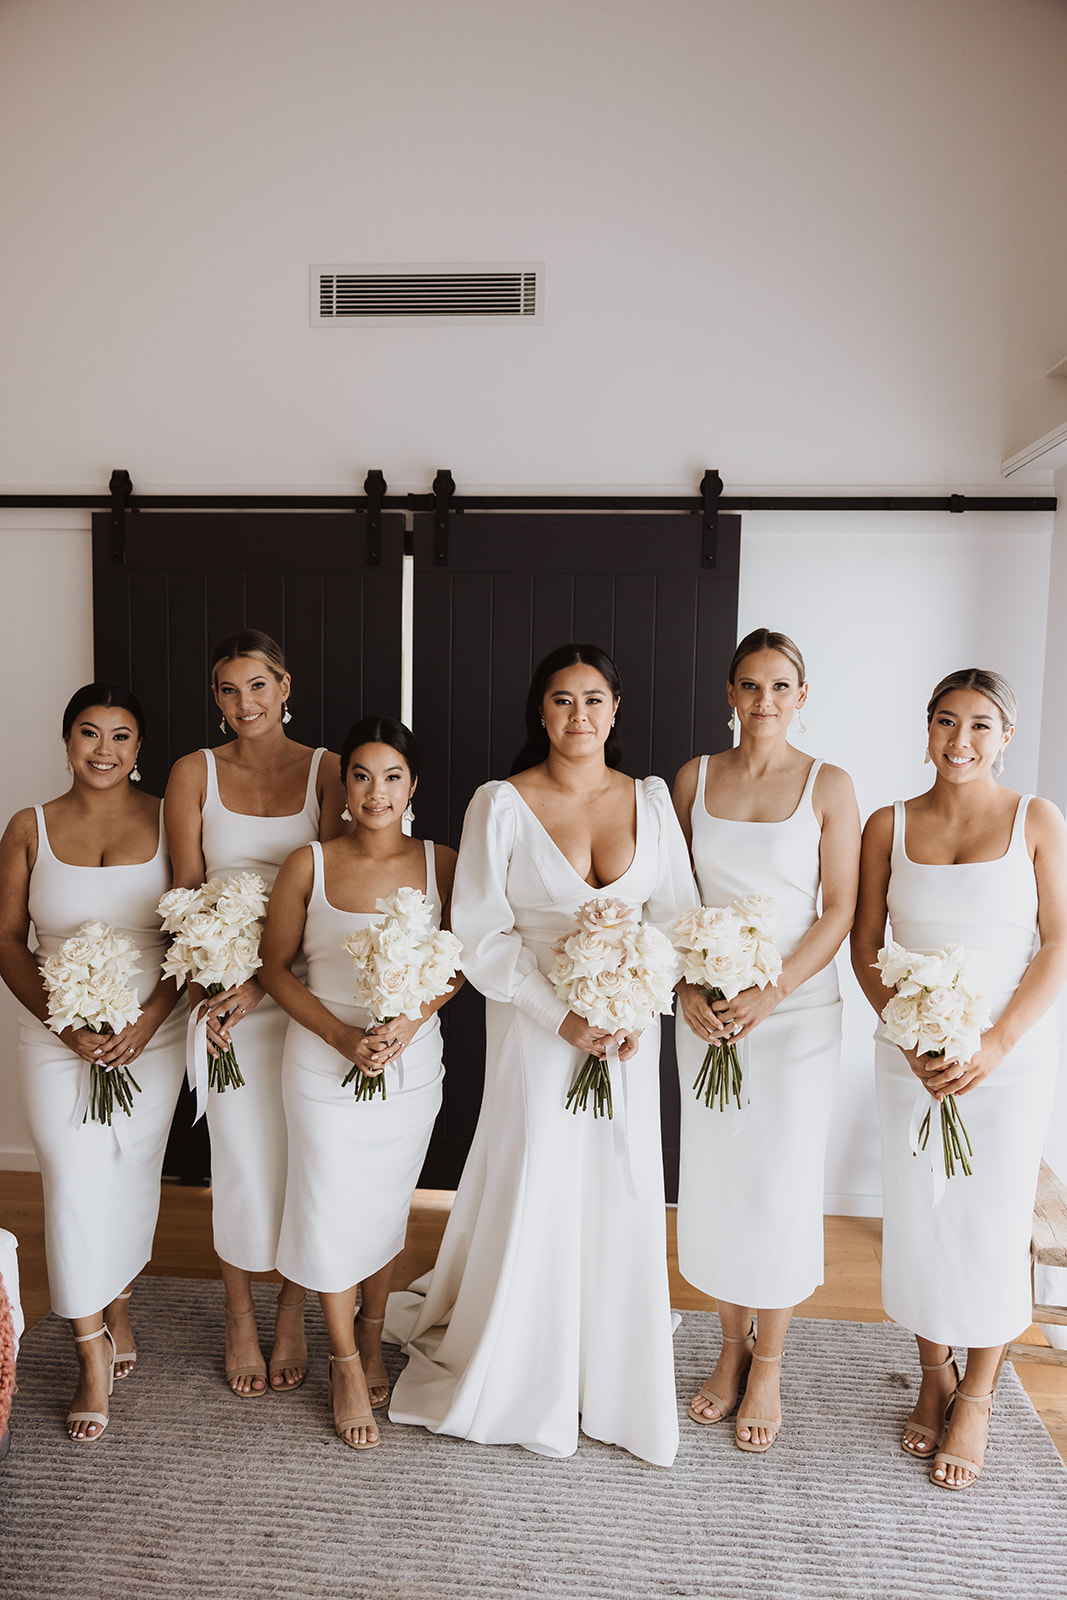 Bride with her bridesmaids wearing gown and holding flower bouquet